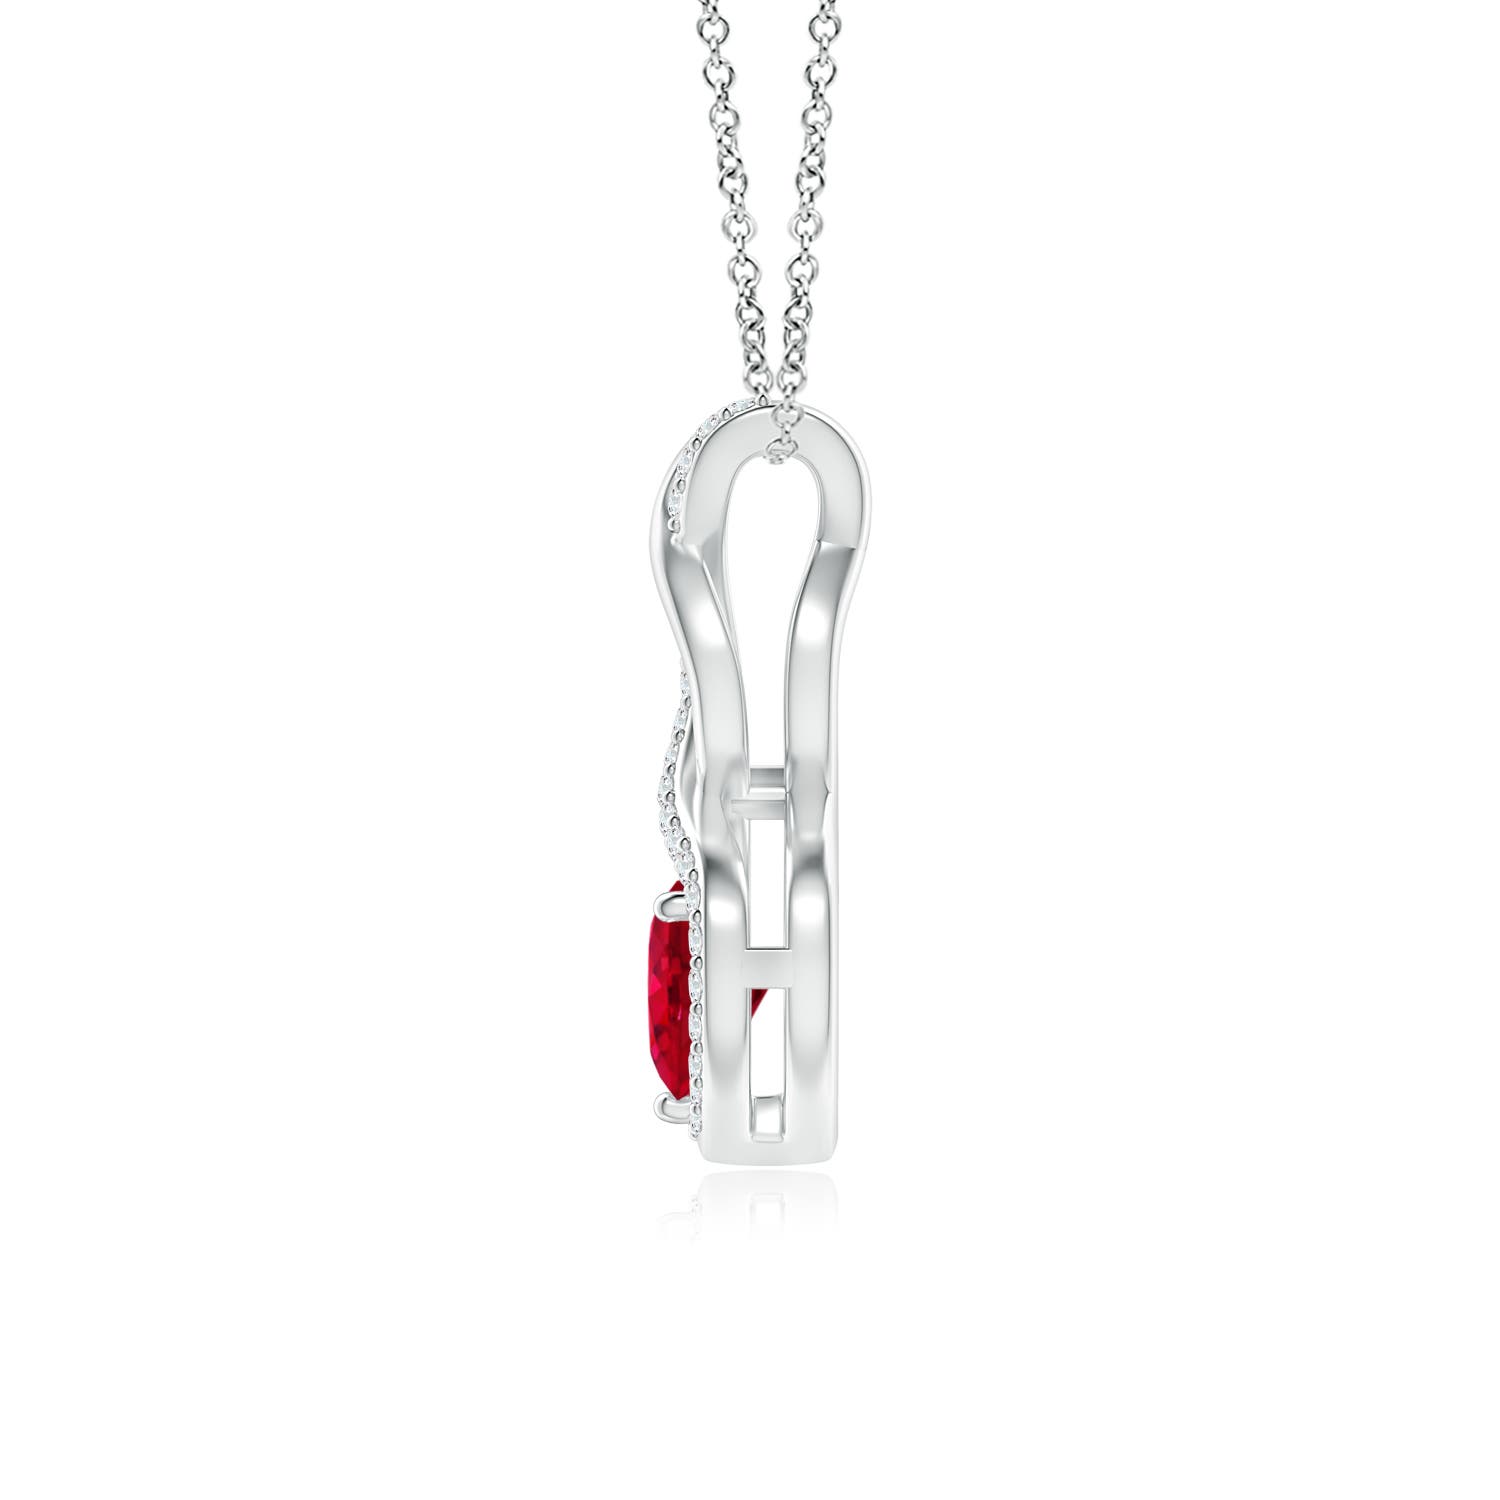 AAA - Ruby / 0.61 CT / 14 KT White Gold